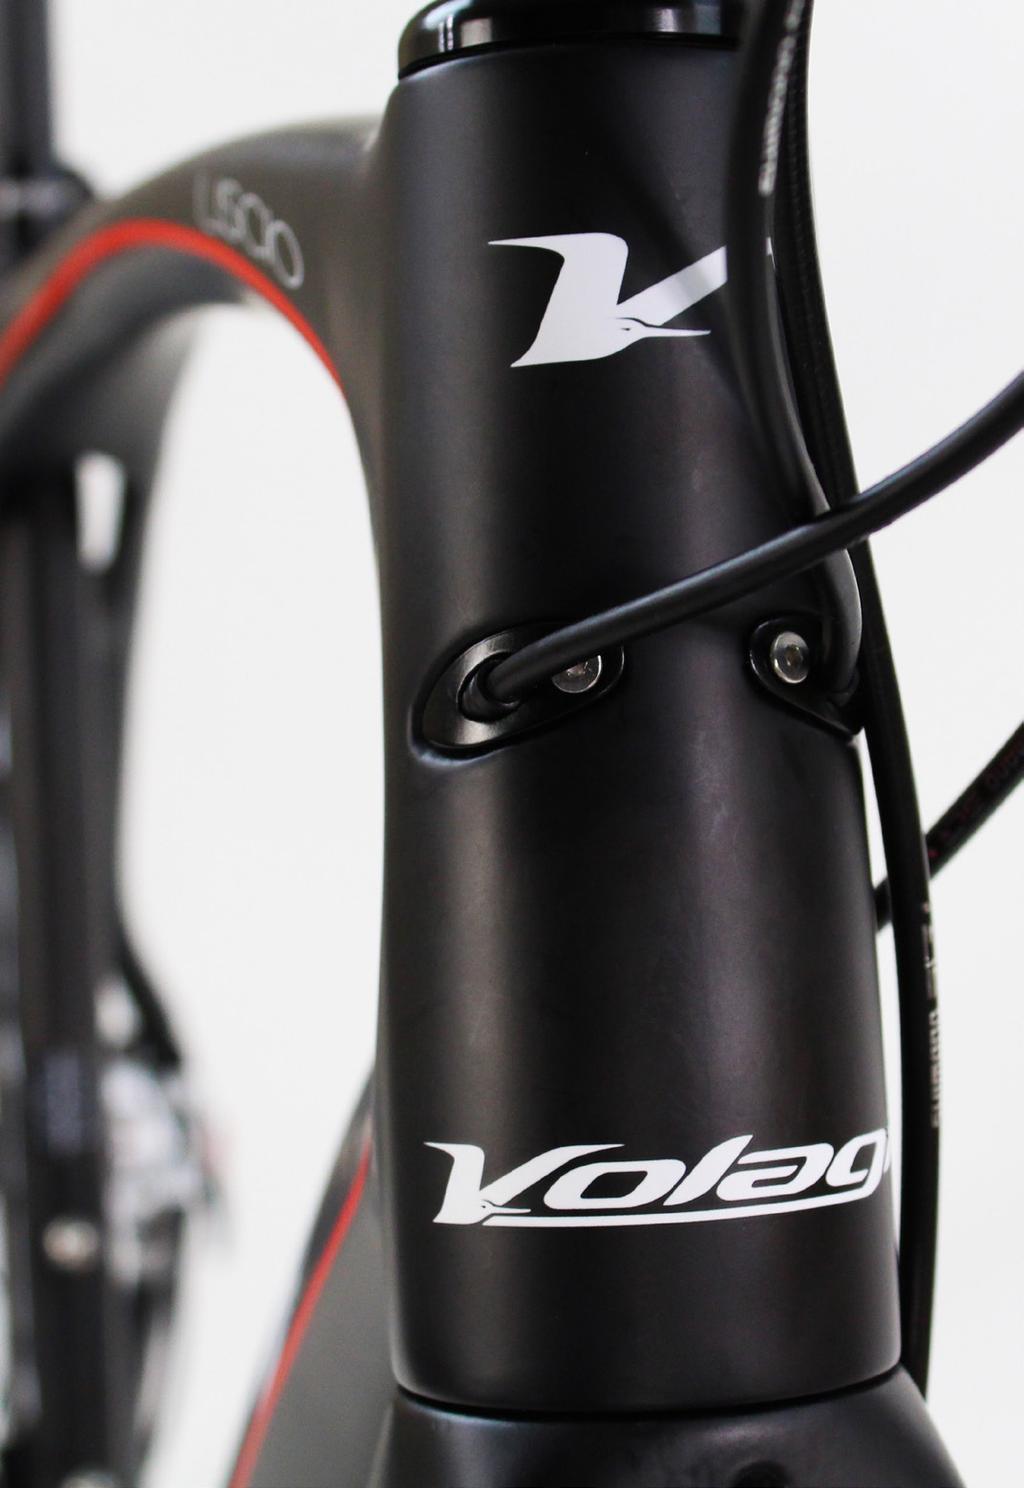 Disc brakes have been seen on bikes for years, but Volagi was the first to equip a high end carbon road bike with the technology.